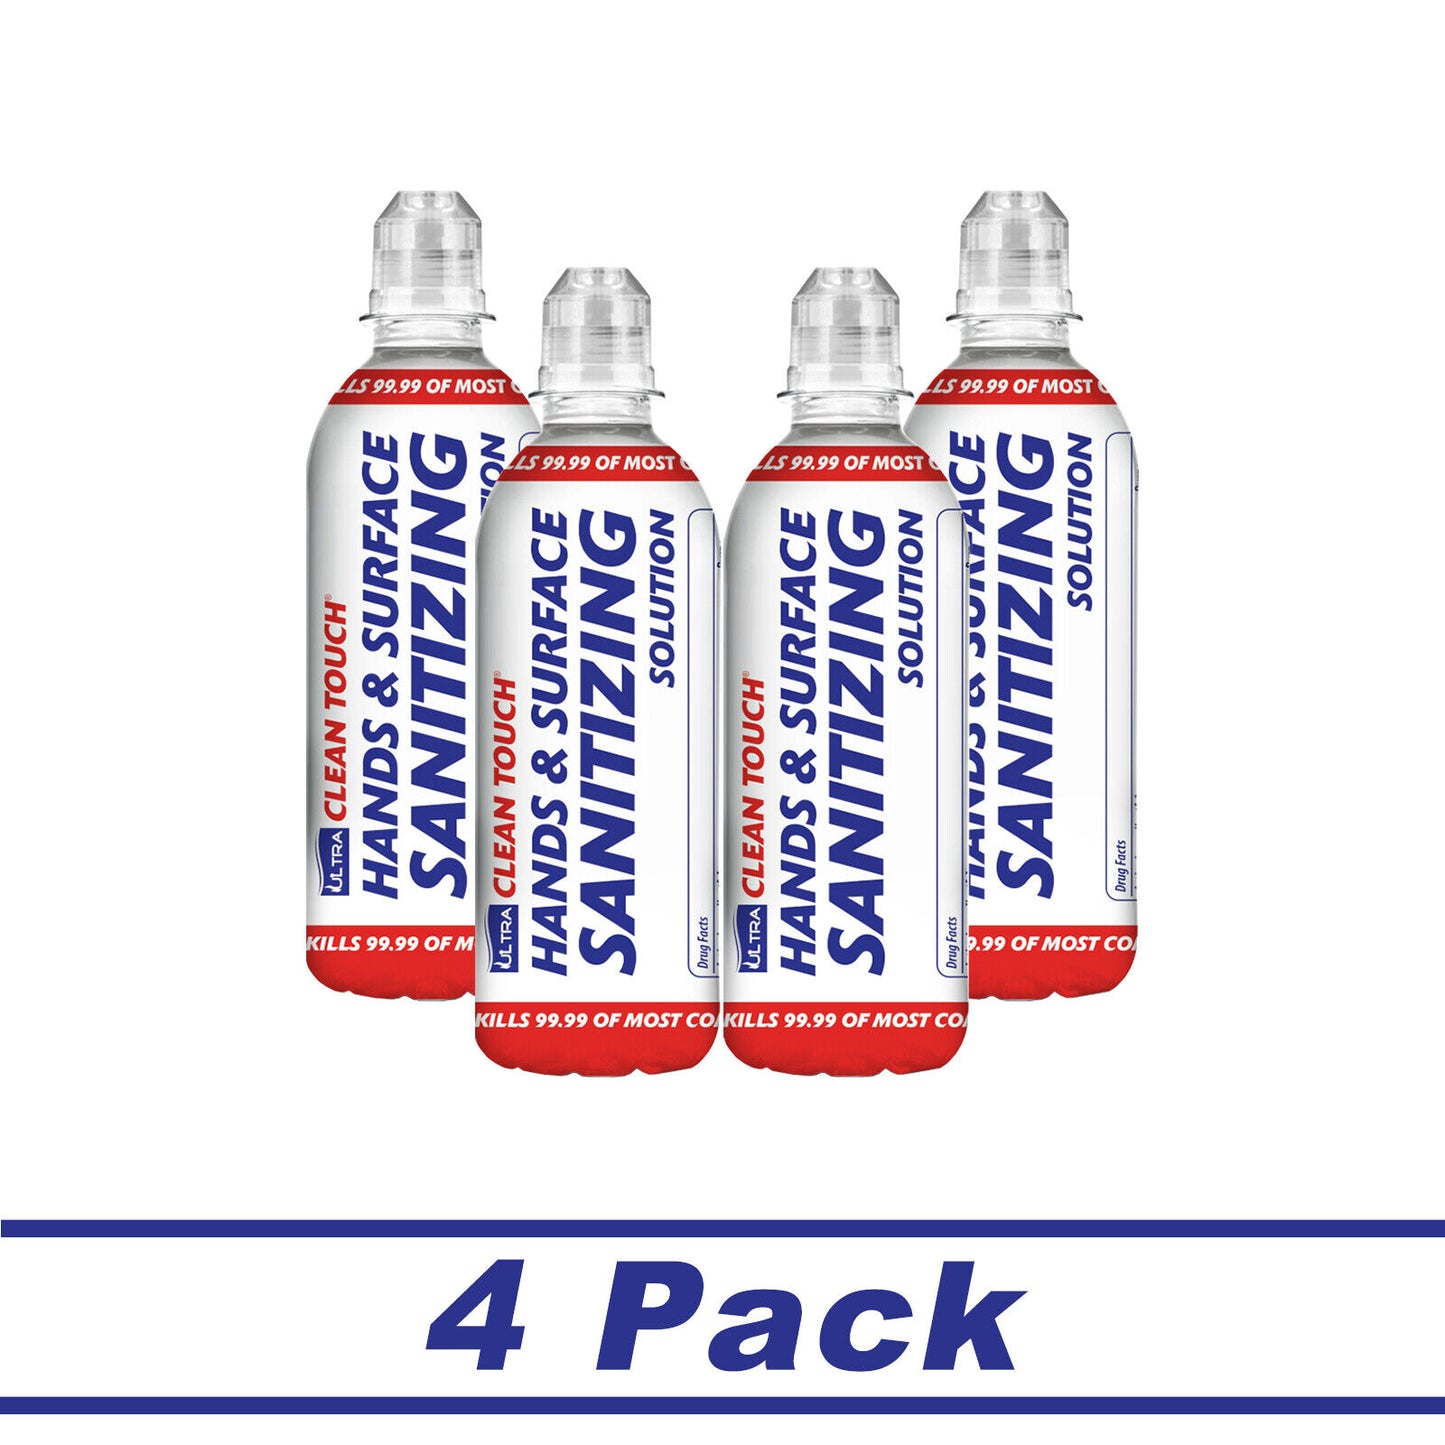 4 x Hands Sanitizer and Surface Sanitiser Solution Alcohol Free 330ml KILLS 99%